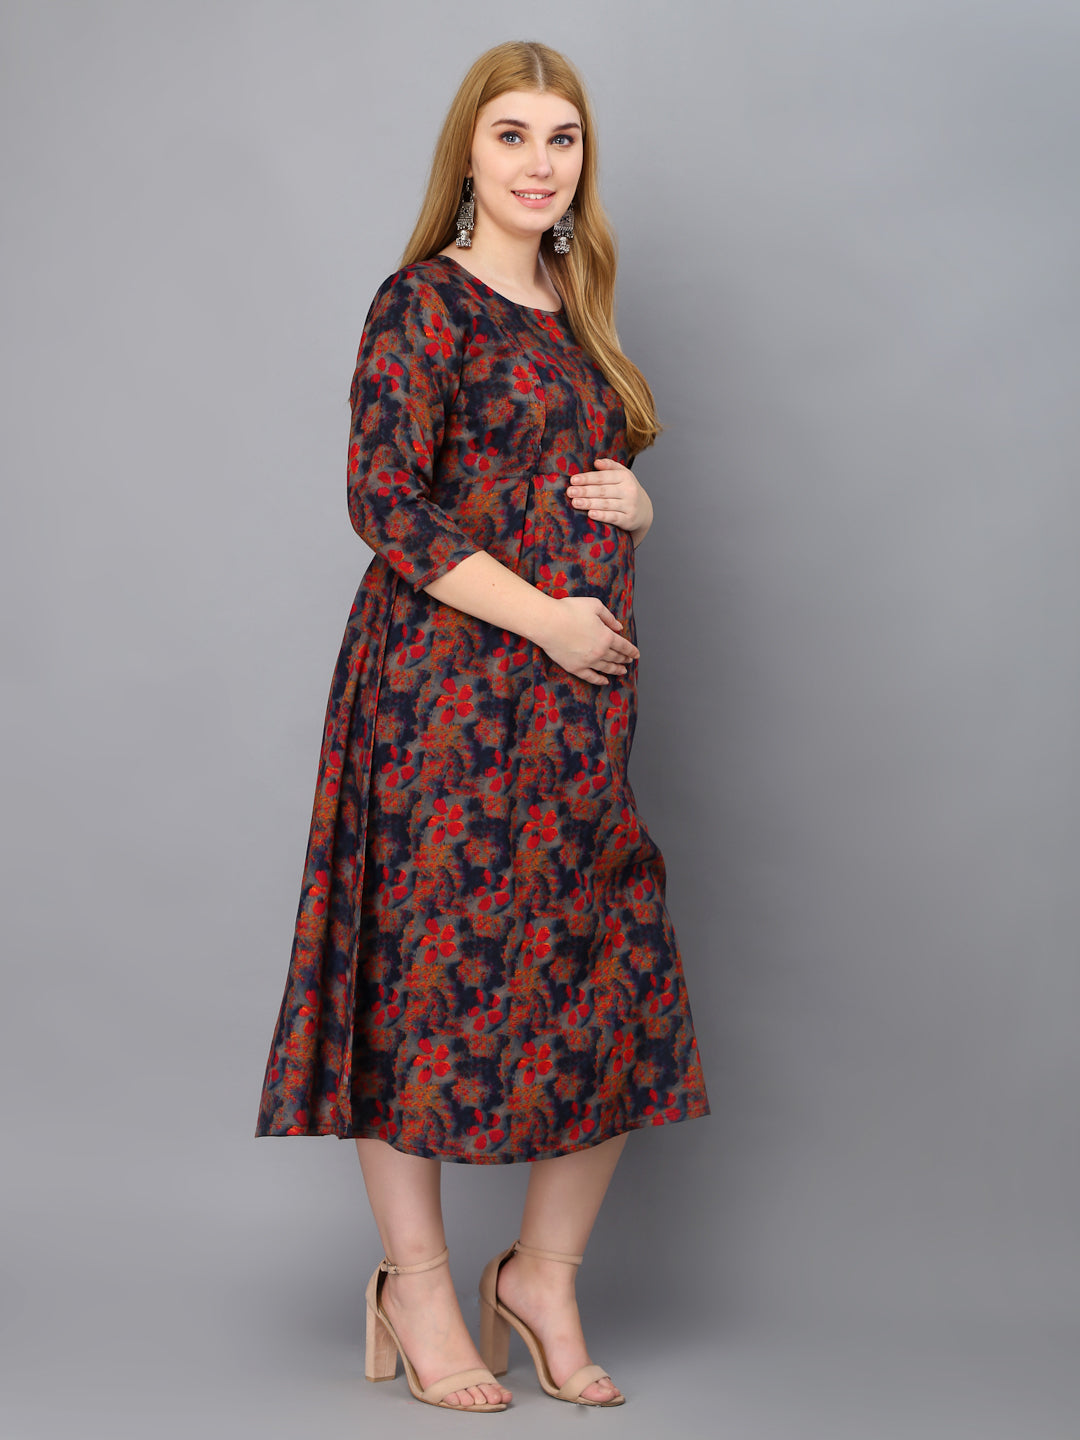 Abstract Printed Blue Maternity Feeding Gown with Zip